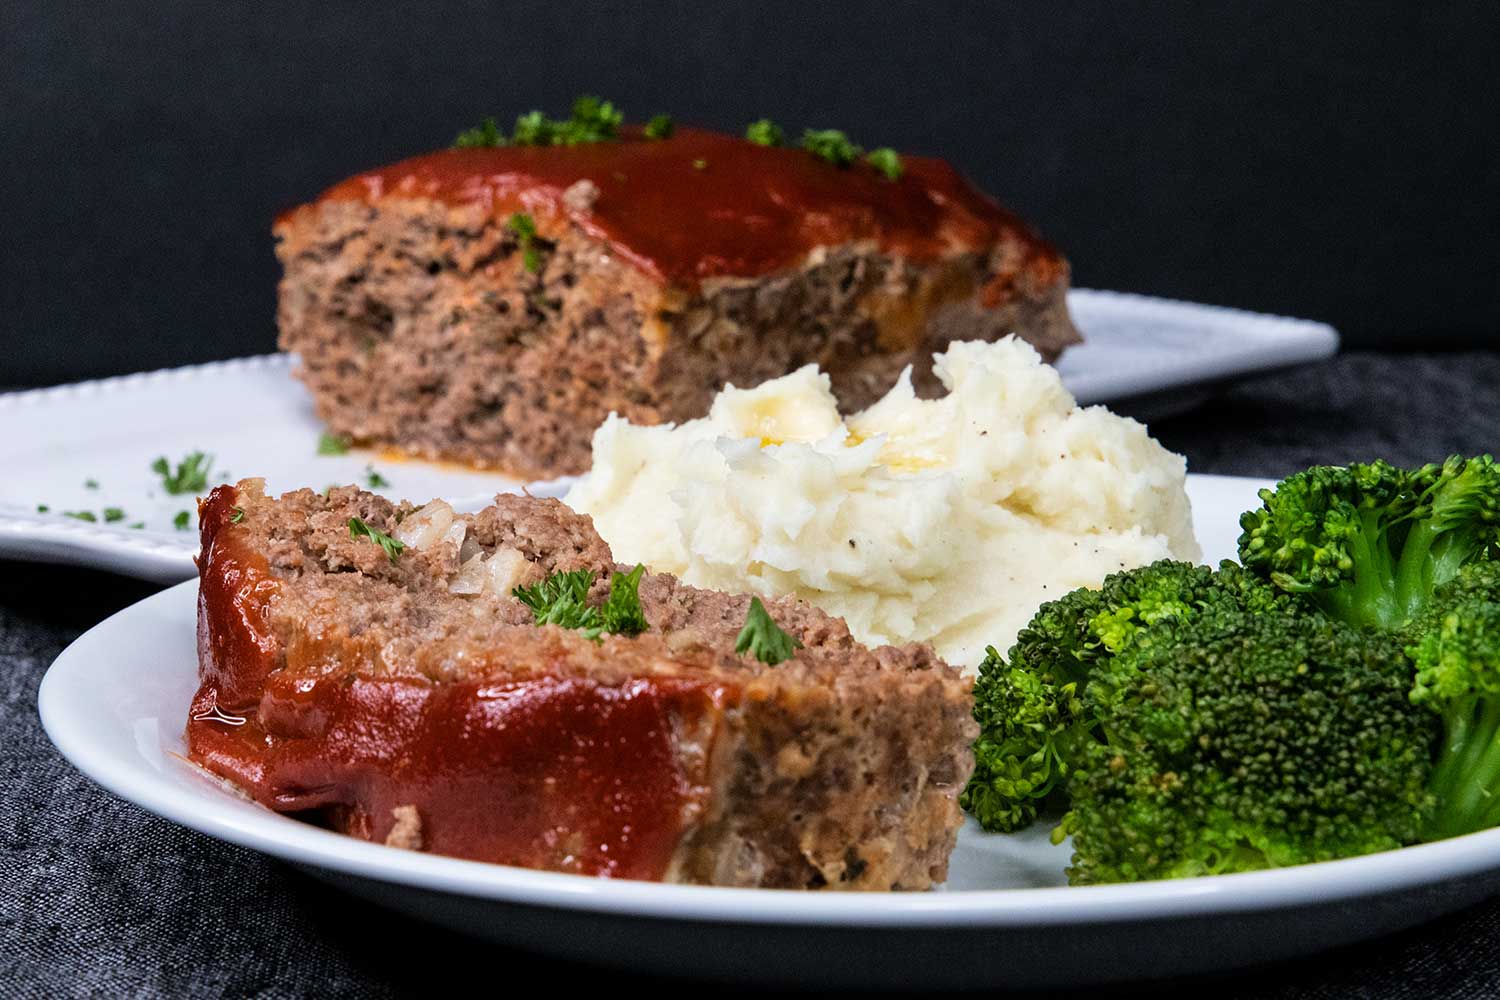 Meatloaf with mashed potatoes and broccoli